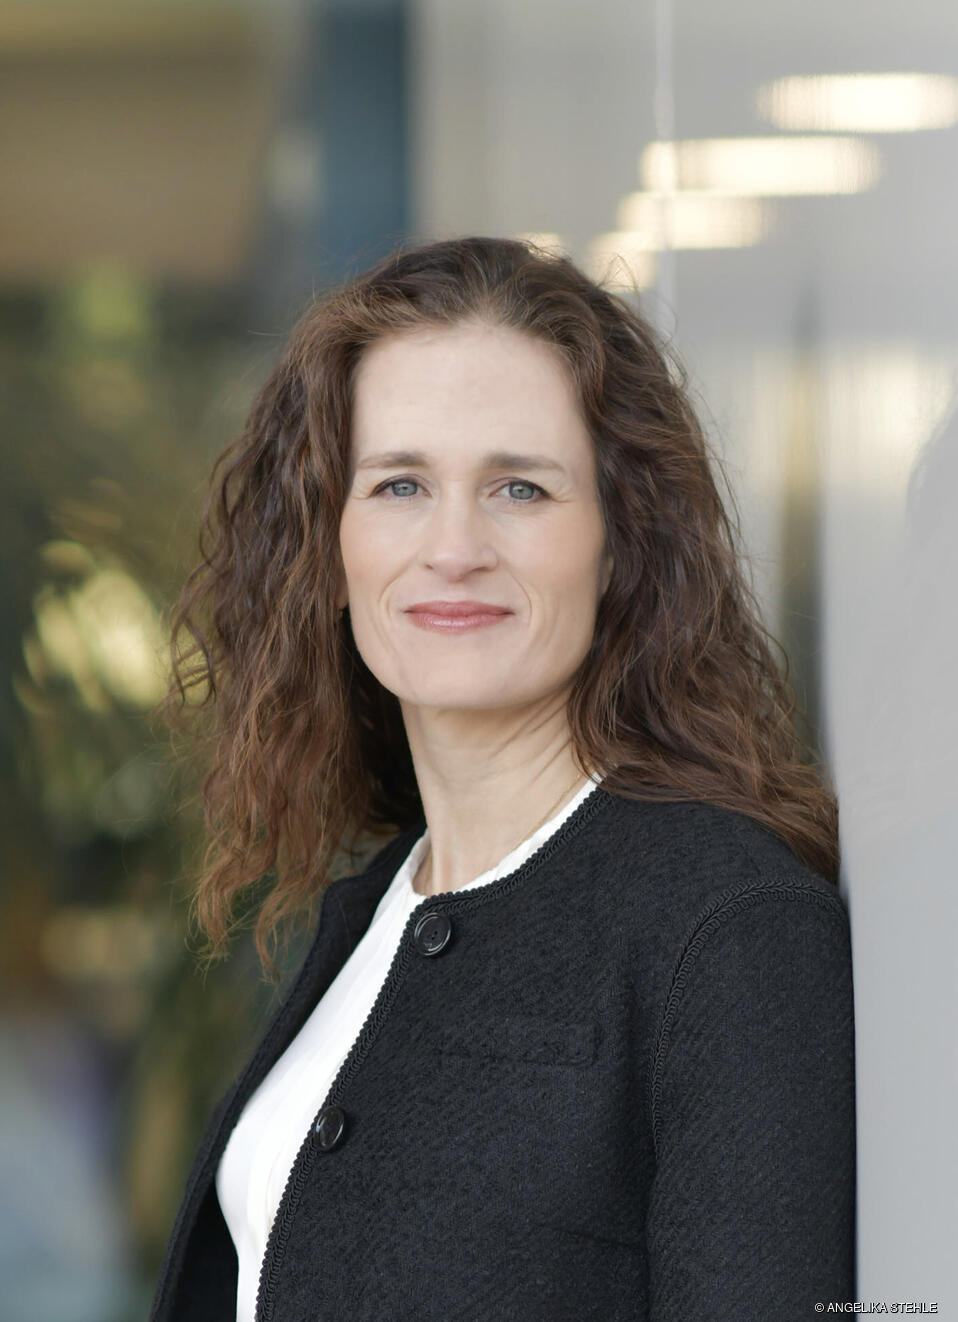 Petra Sandner, Chief Sustainability Officer of the Helaba Group